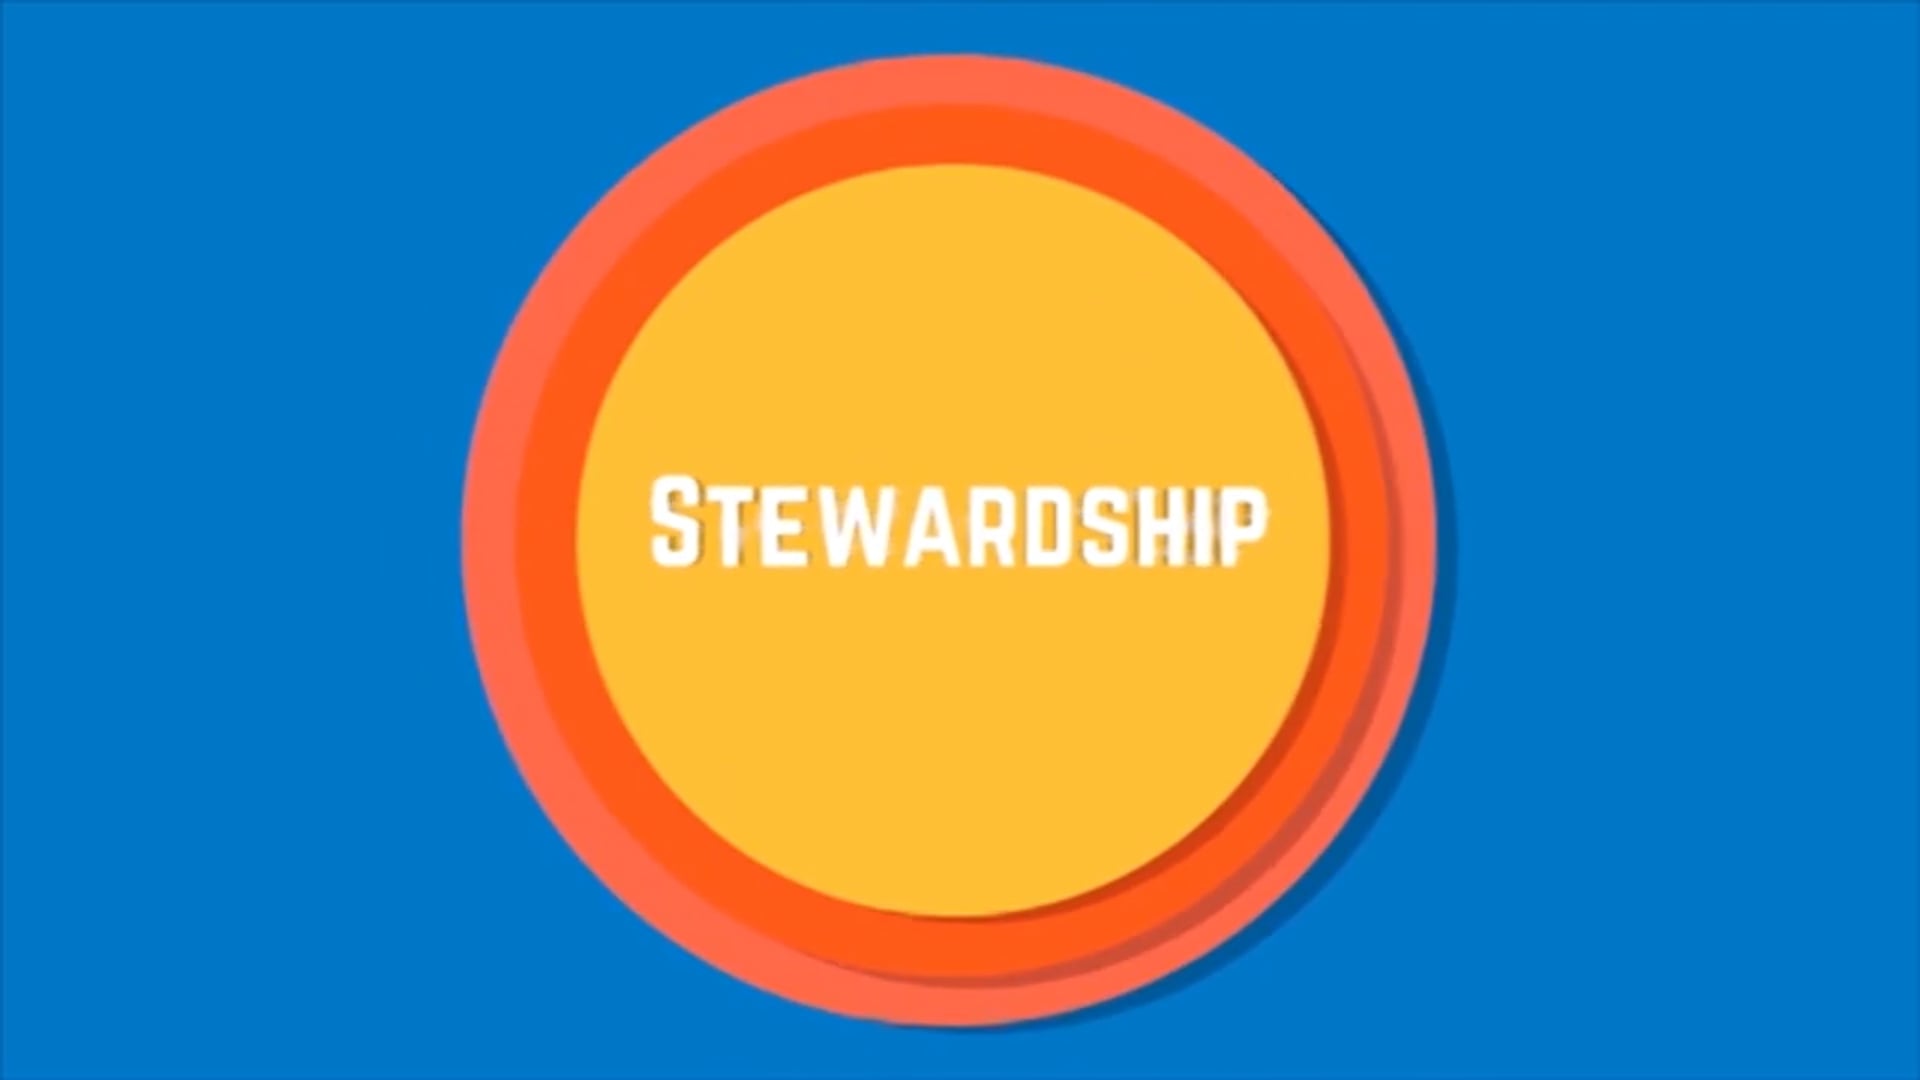 Stewardship - Looking After Your Assets